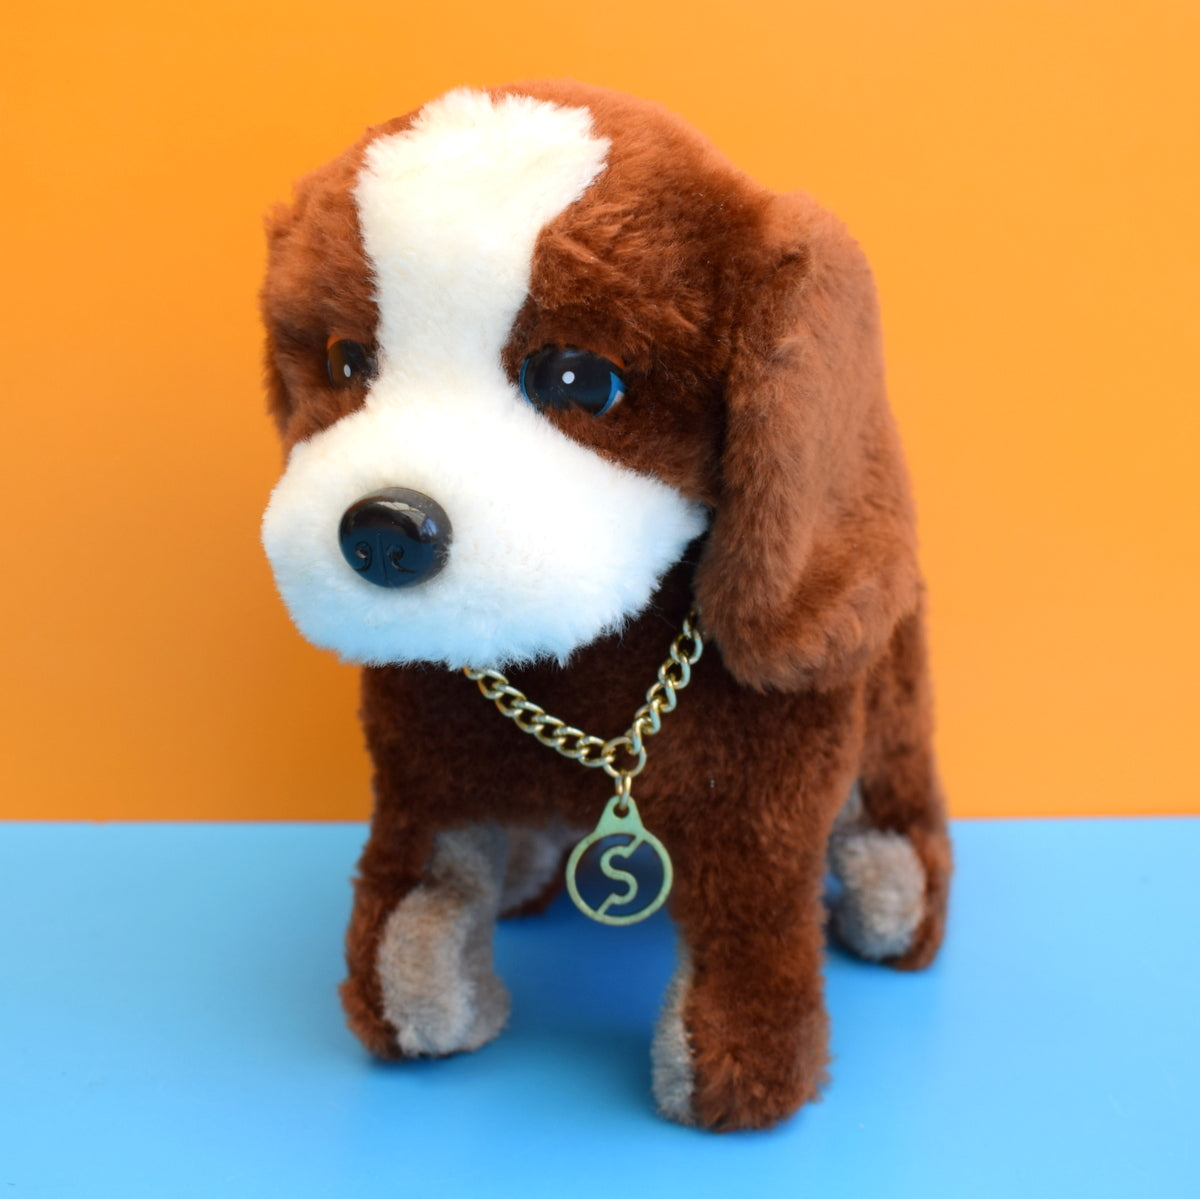 Vintage 1980s Cute Spaniel - Battery Operated Walking Puppy Dog Toy